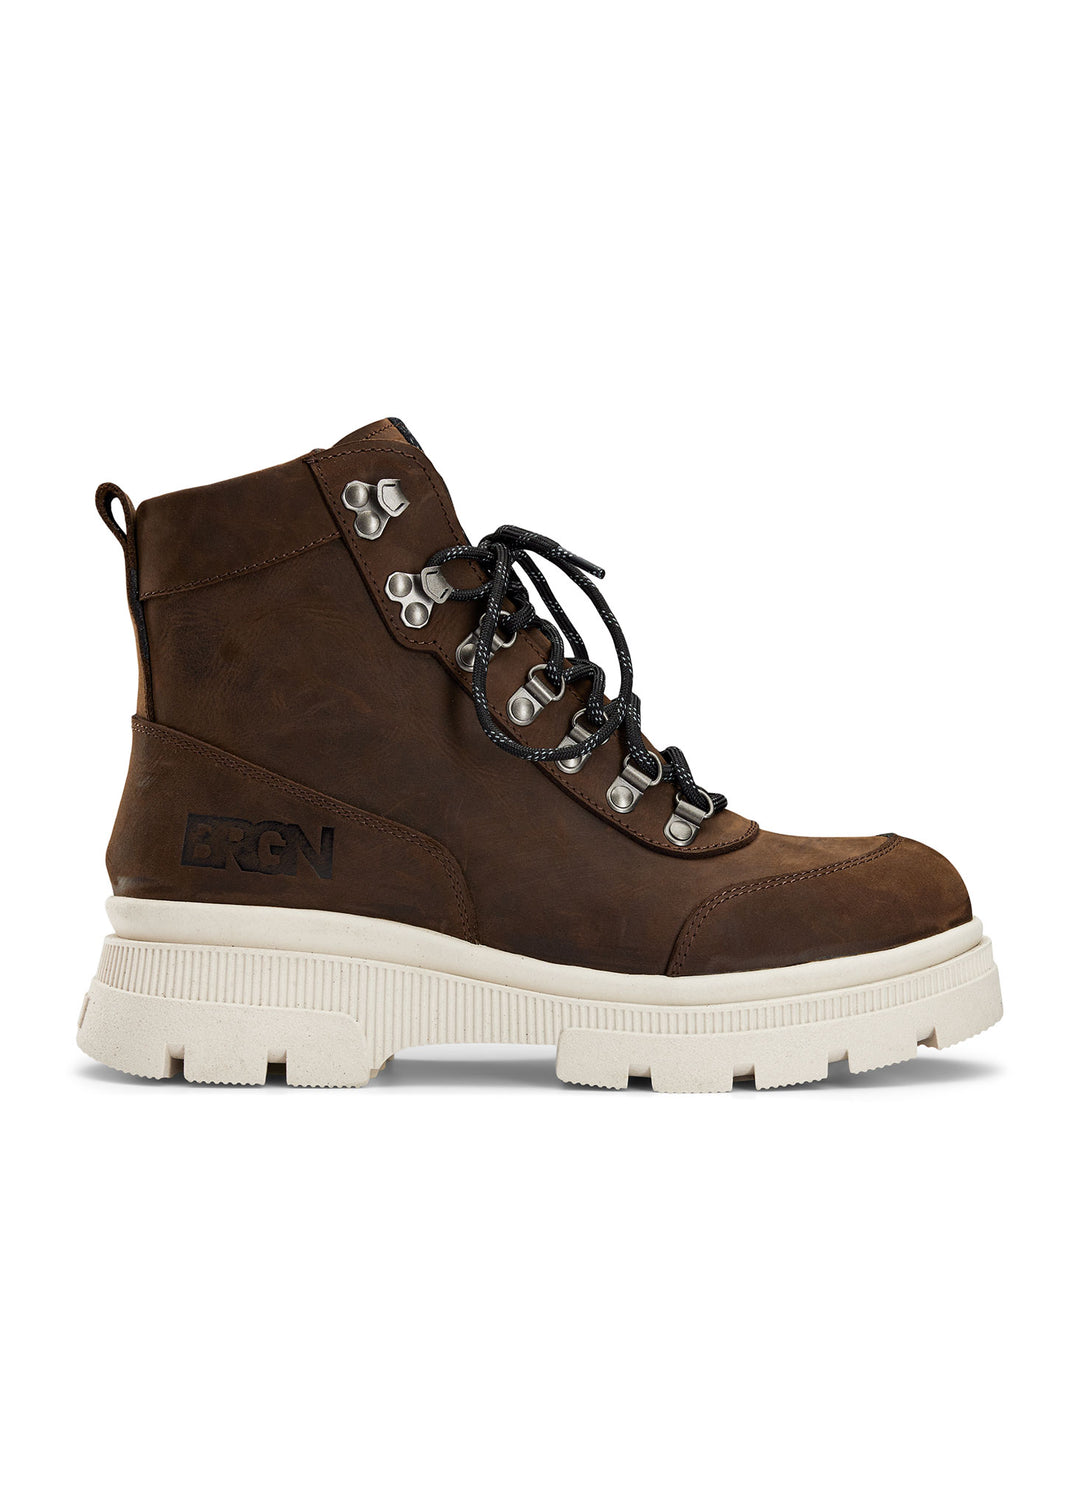 BRGN by Lunde & Gaundal Hiking Boots Shoes 187 Chocolate Brown / 135 Sand